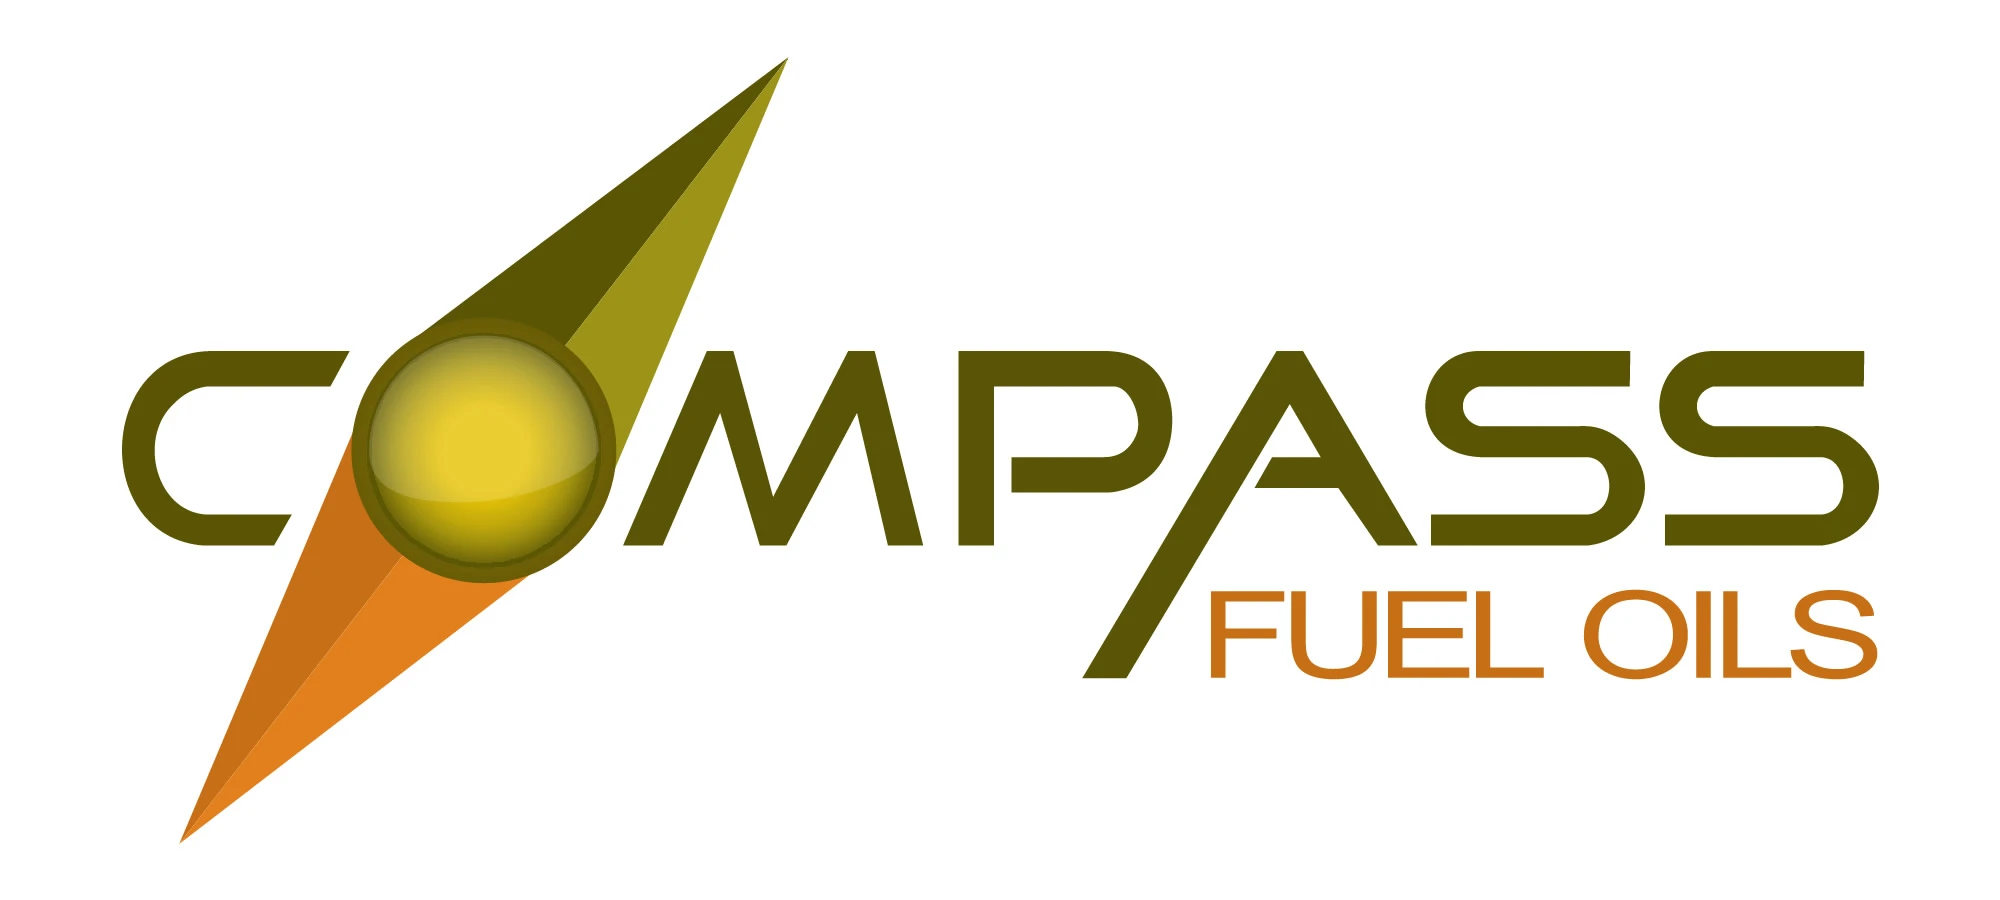 Compass Fuel Oils & Lubricants - Nationwide Fuel Supplier Photo